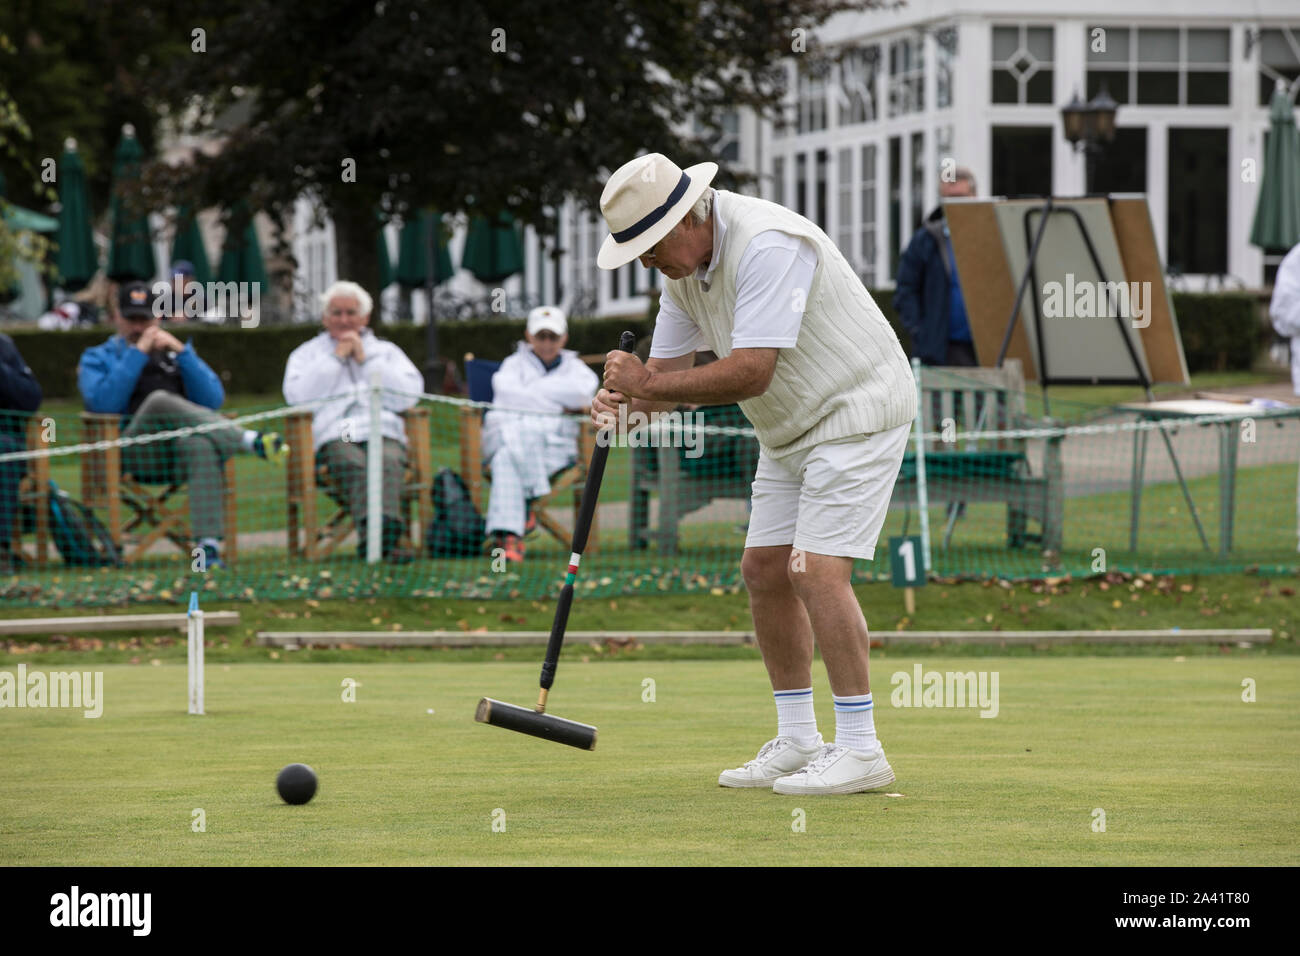 Chris Roberts at Phyllis Court V Nottingham in the National Golf Croquet Inter-Club Championship Final at Phyllis Court Club, Henley on Thames, UK Stock Photo